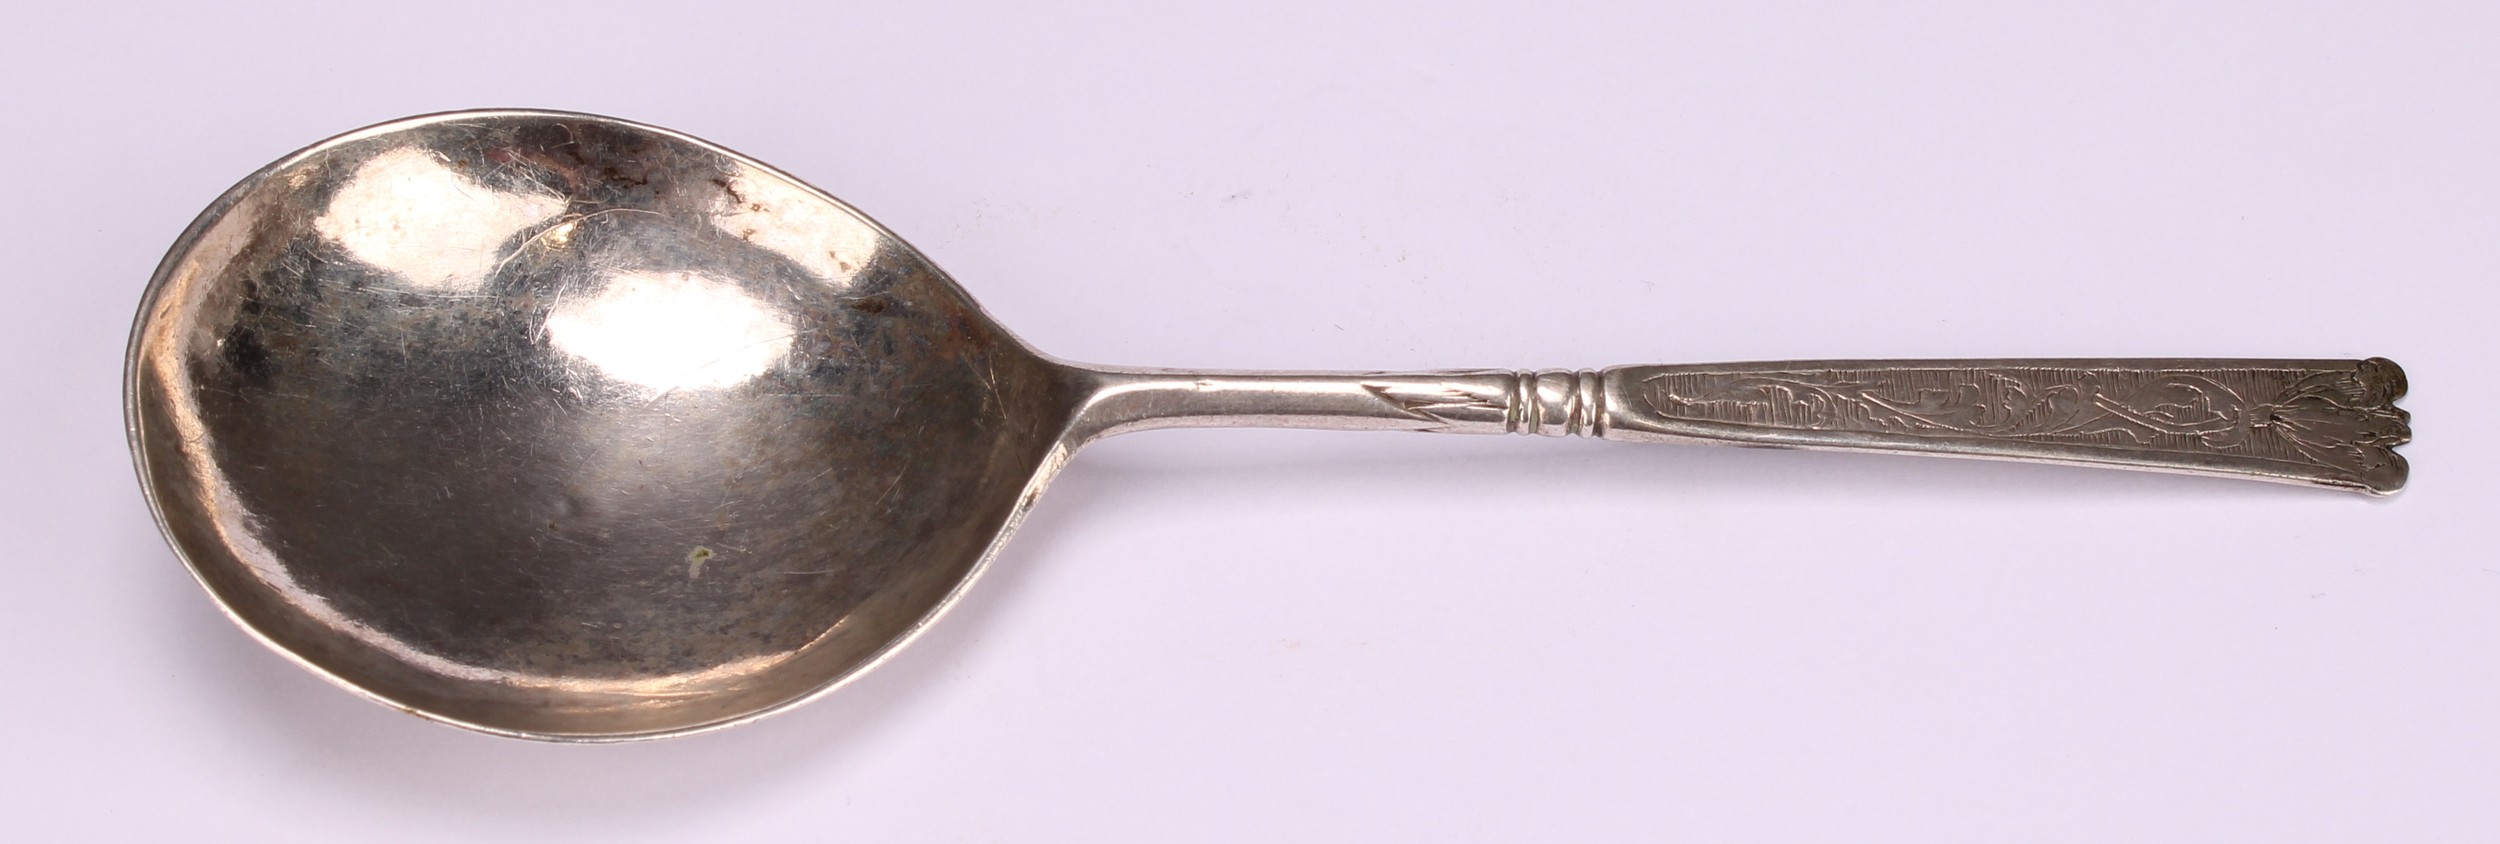 An early 18th century silver spoon, probably Norwegian, the stem engraved with a flower on a - Image 2 of 4